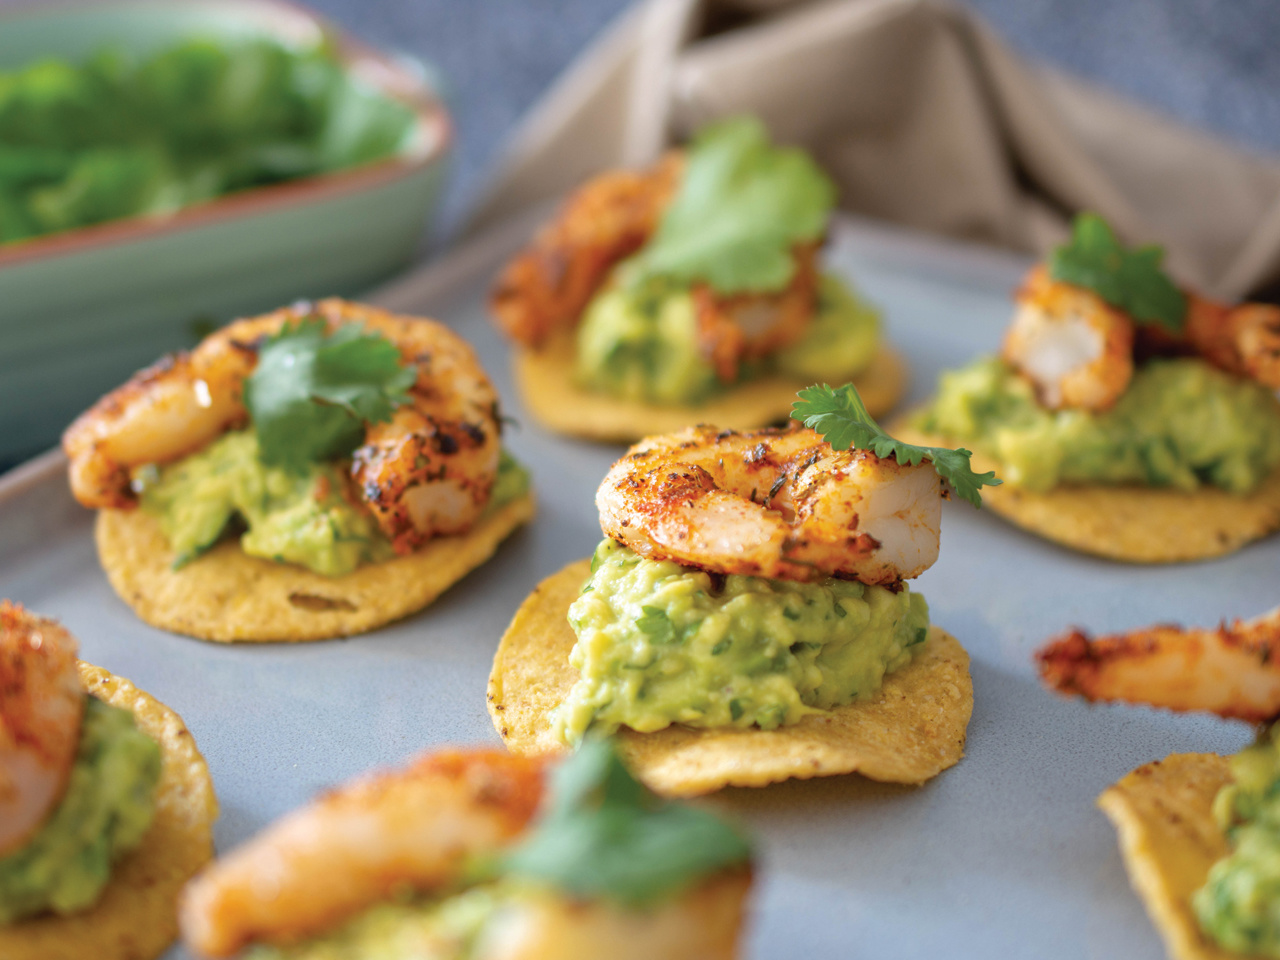  Grilled Prawn and Guacamole Bites

